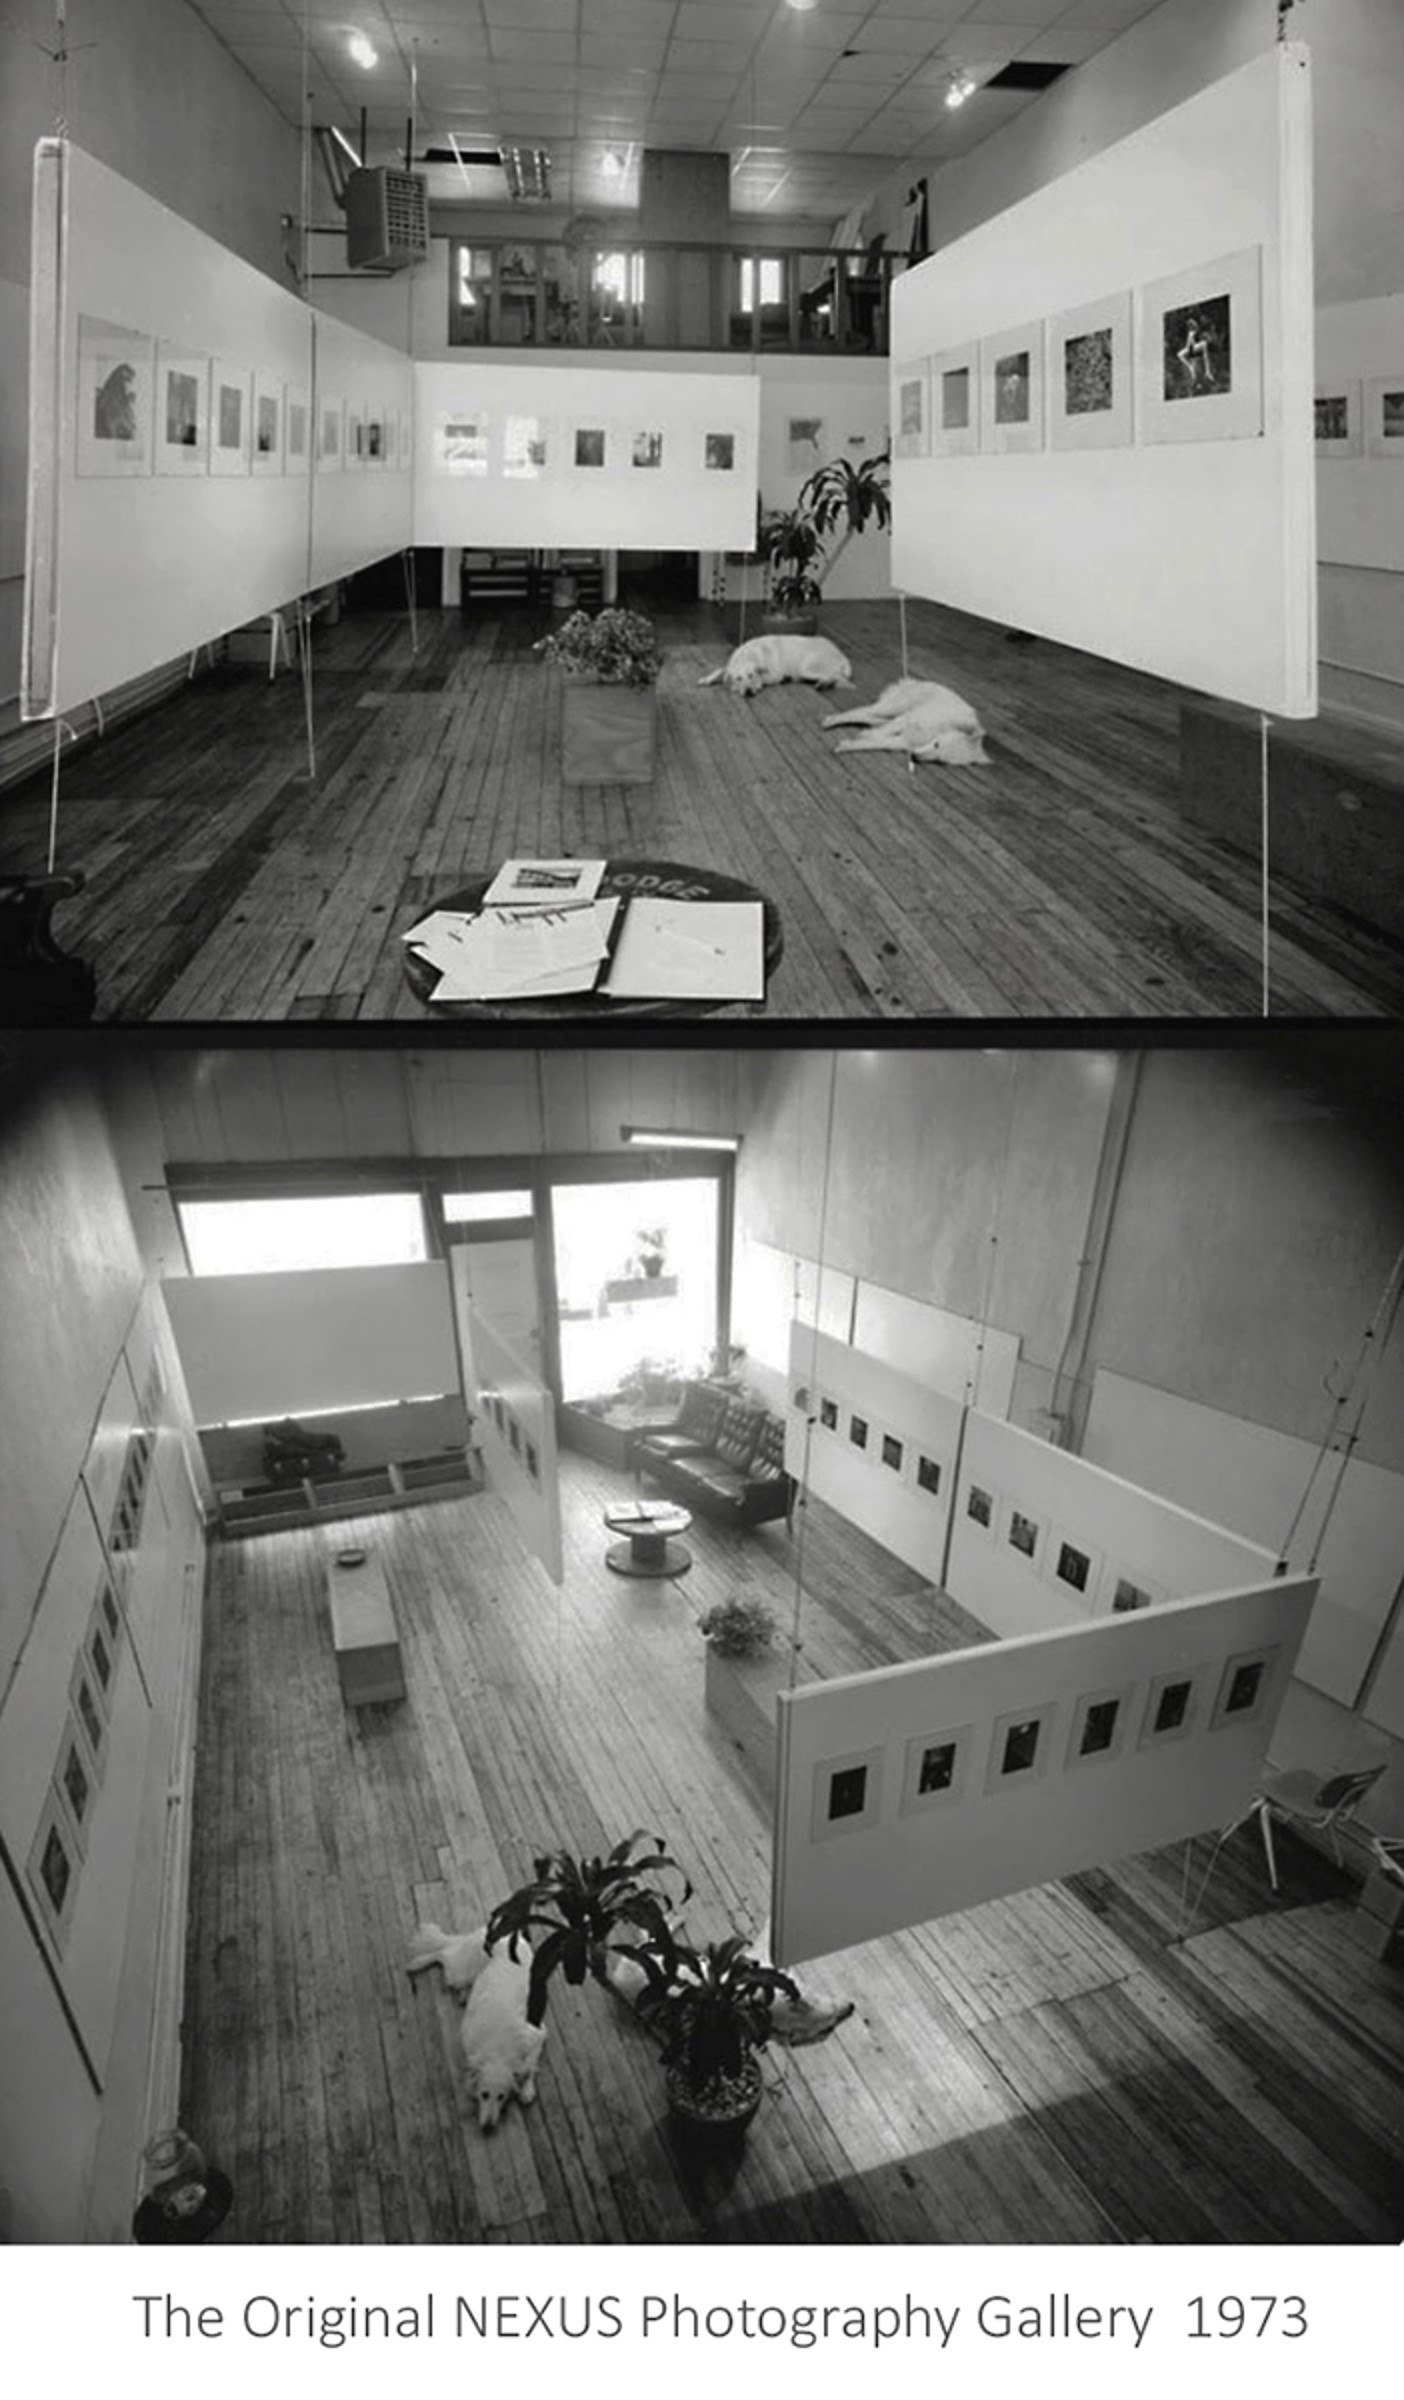 A black and white photograph of the original Nexus photography gallery.